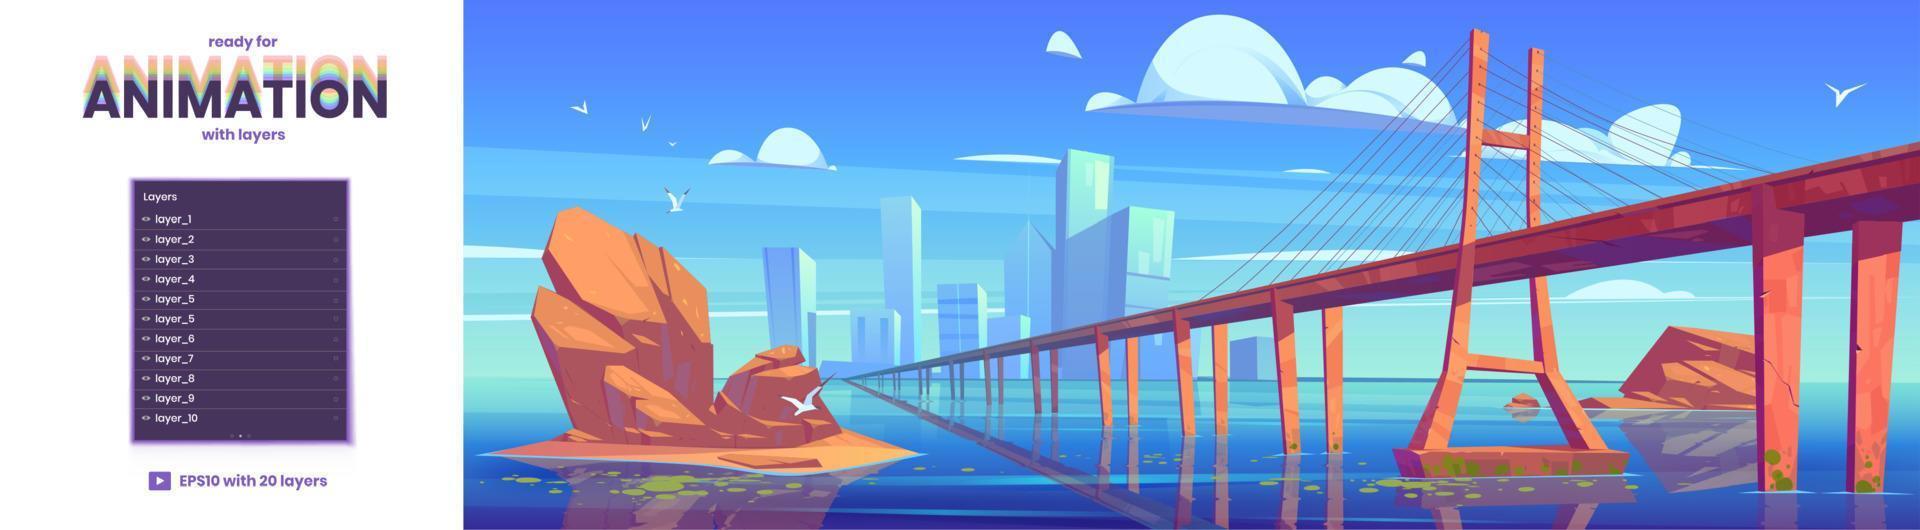 Parallax background with bridge over river vector